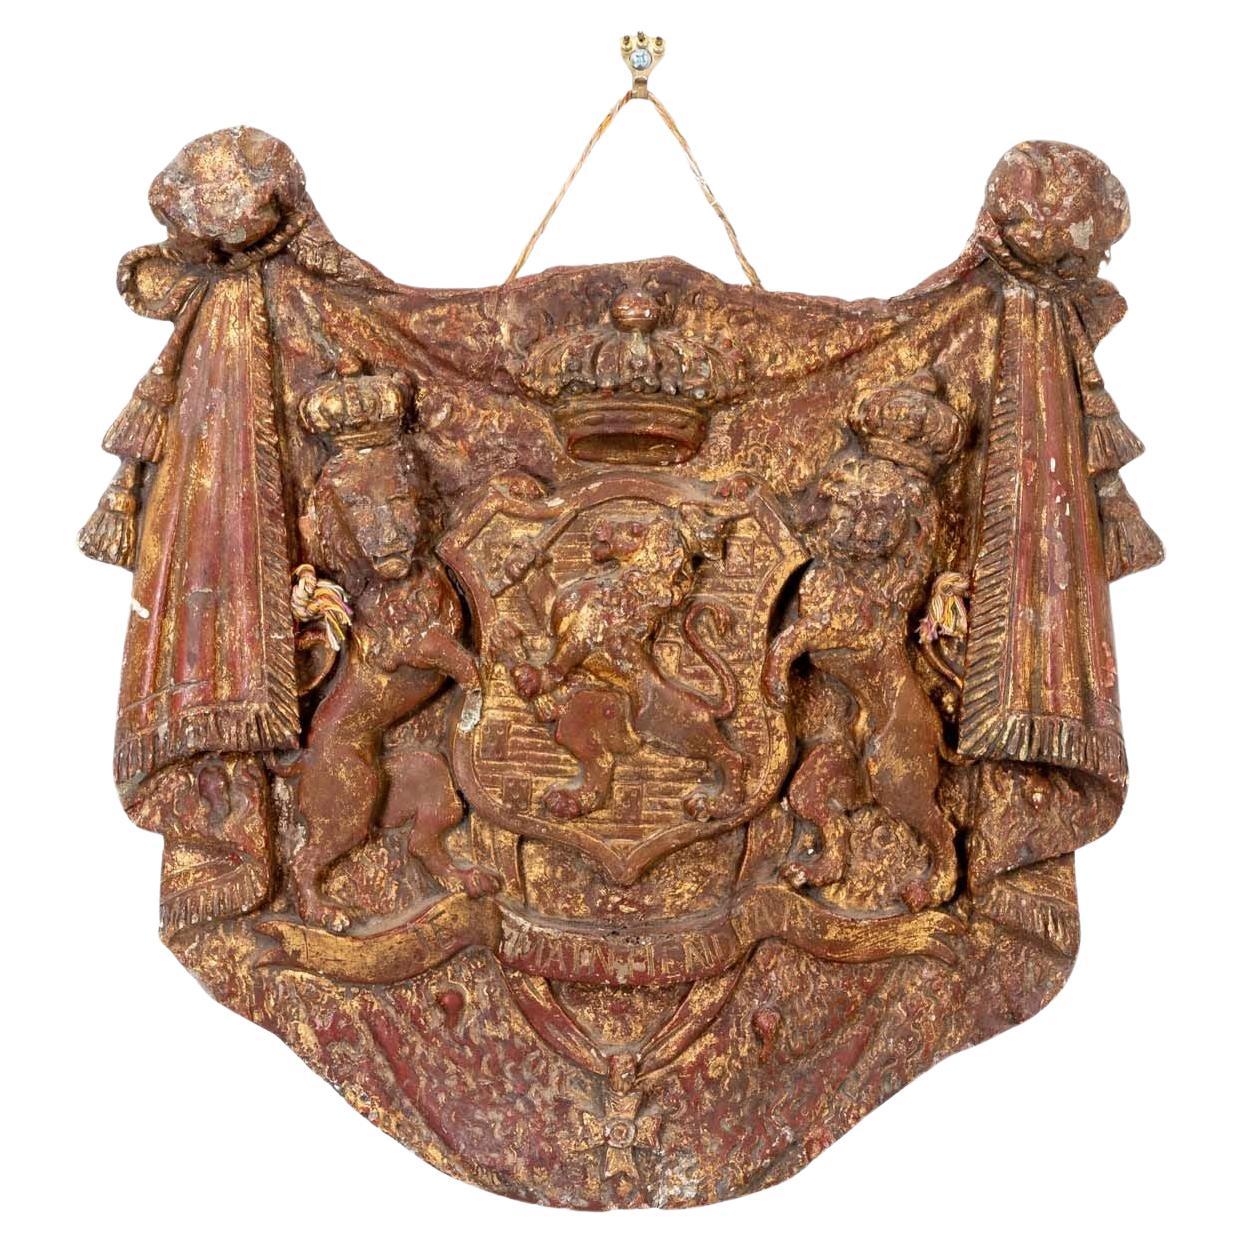 English Heraldic Plaque with Lions, Early 20th Century